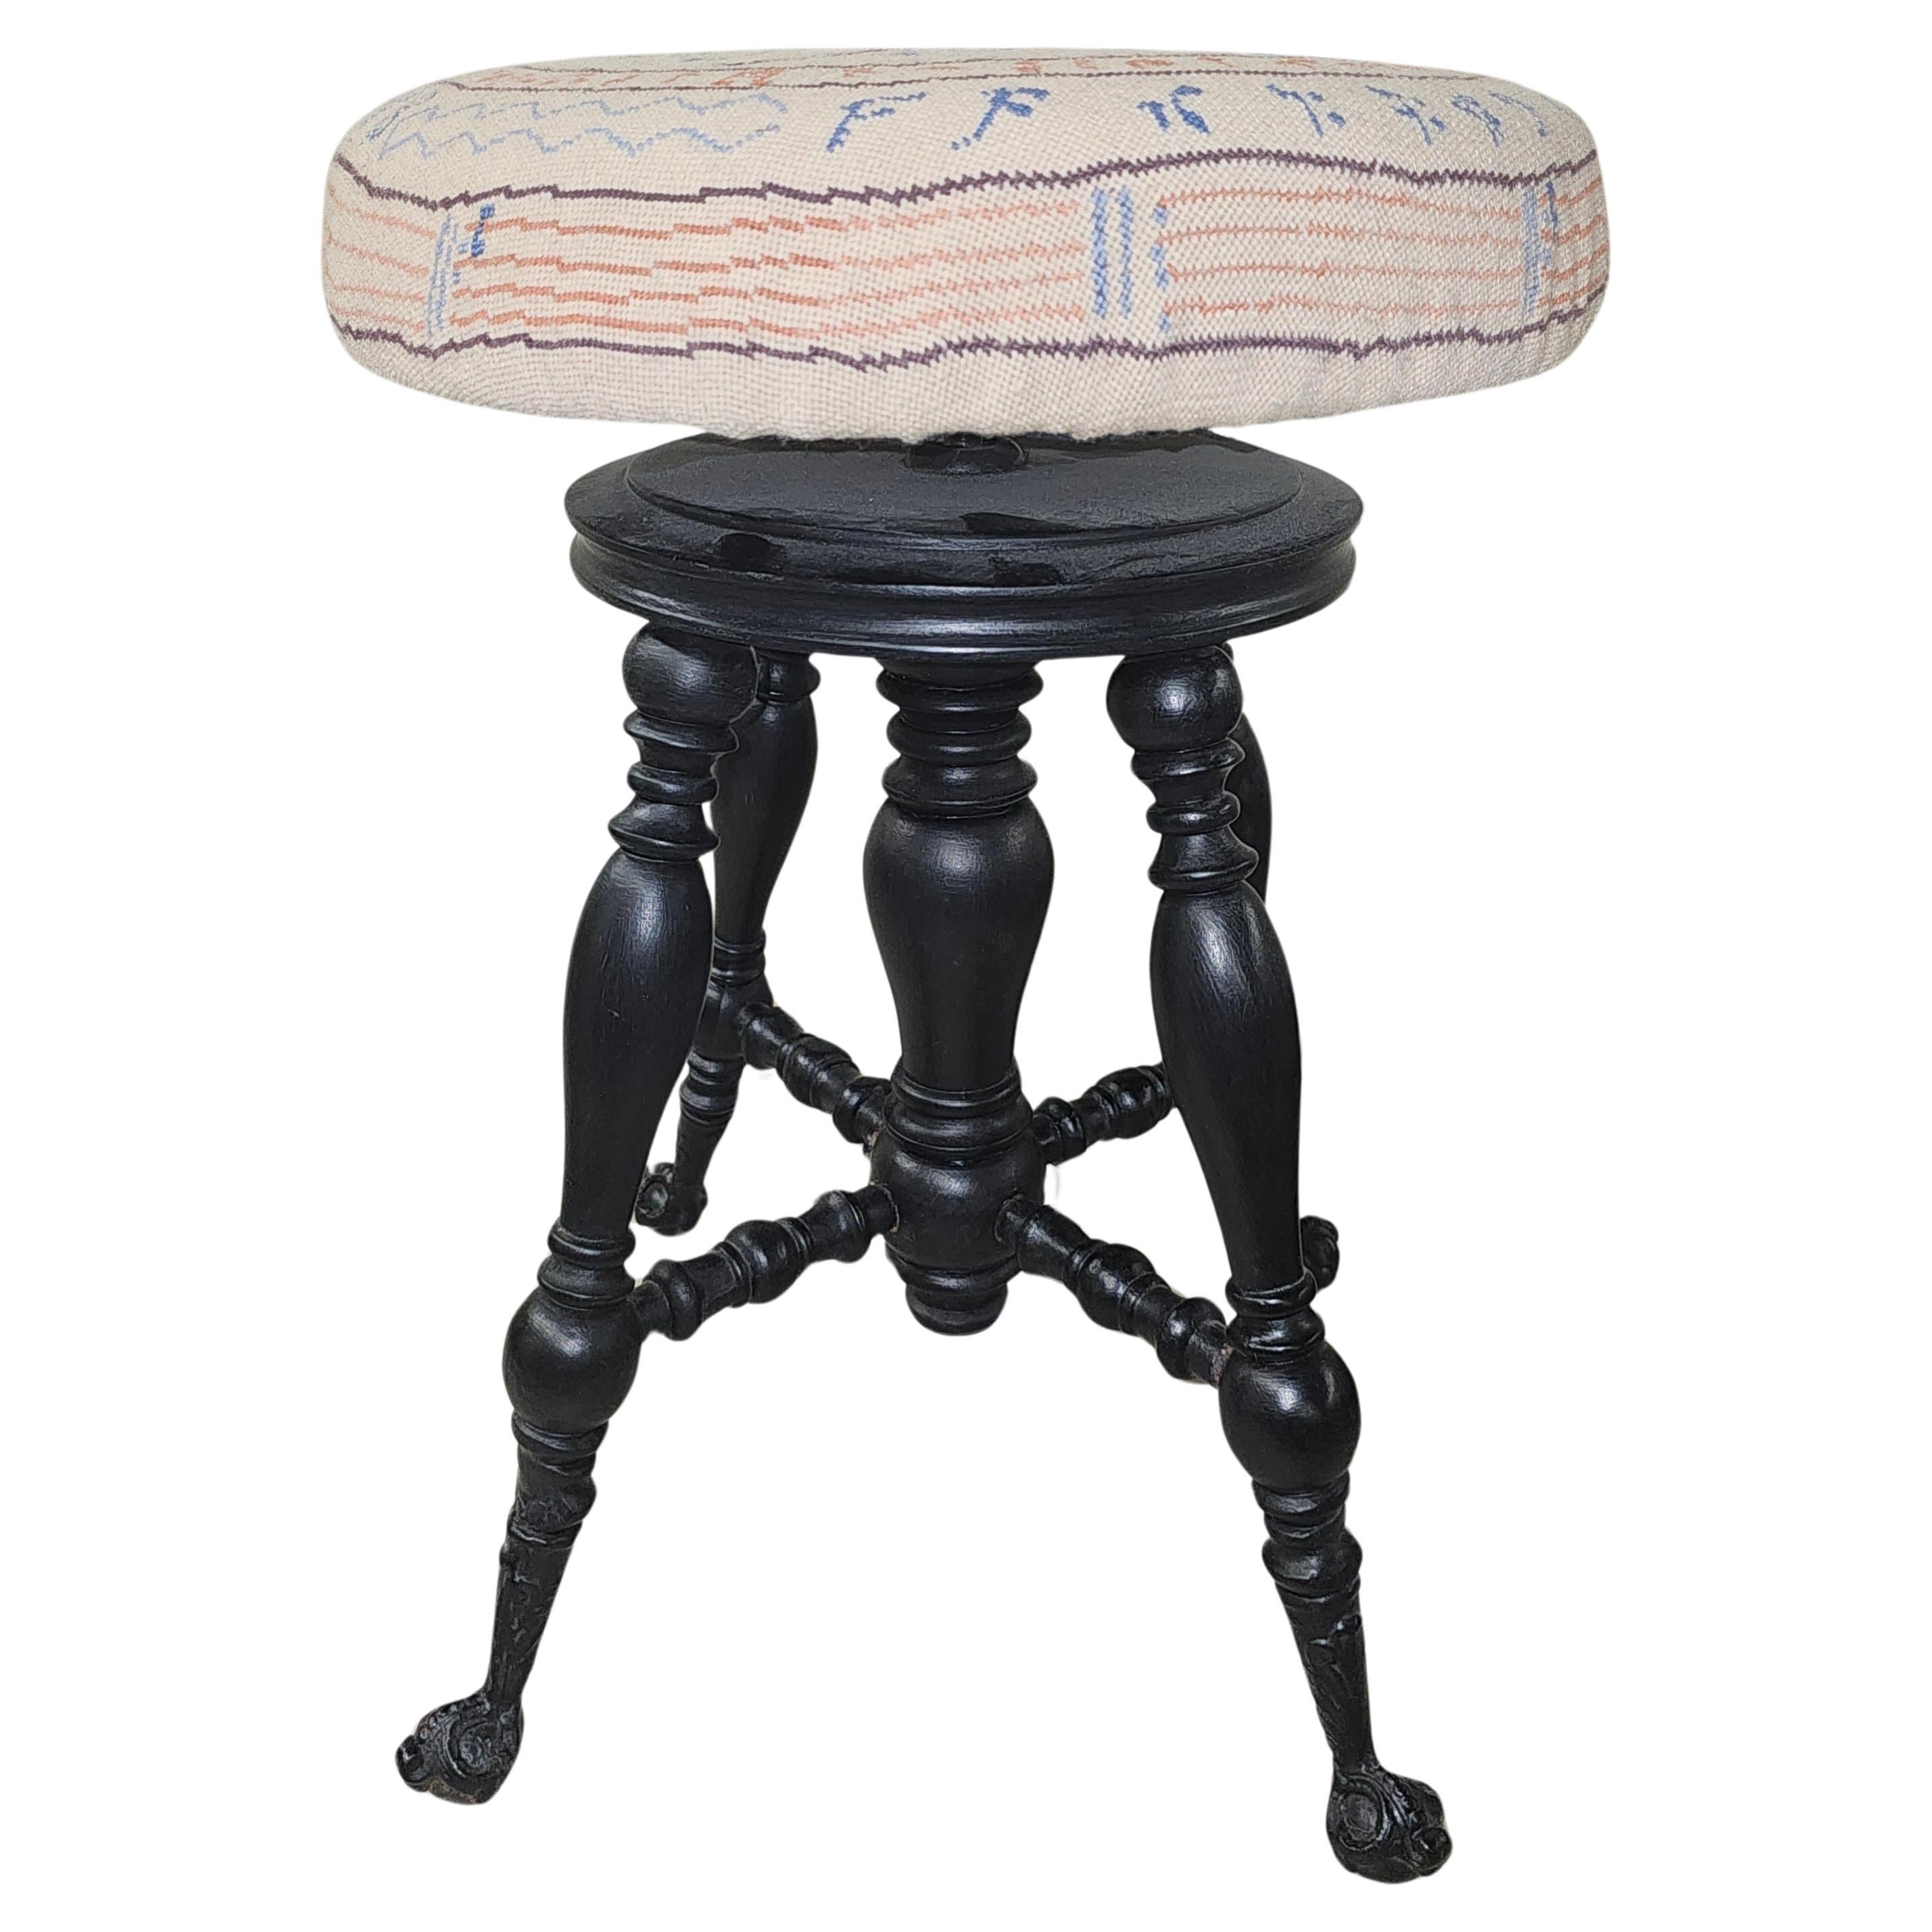 19th Century Victorian Ebonized Wood and Needlepoint Upholstered  Piano Stool. Newer Needlepoint upholstery with various music notes decorated. Adjustable seat high 19 to 23